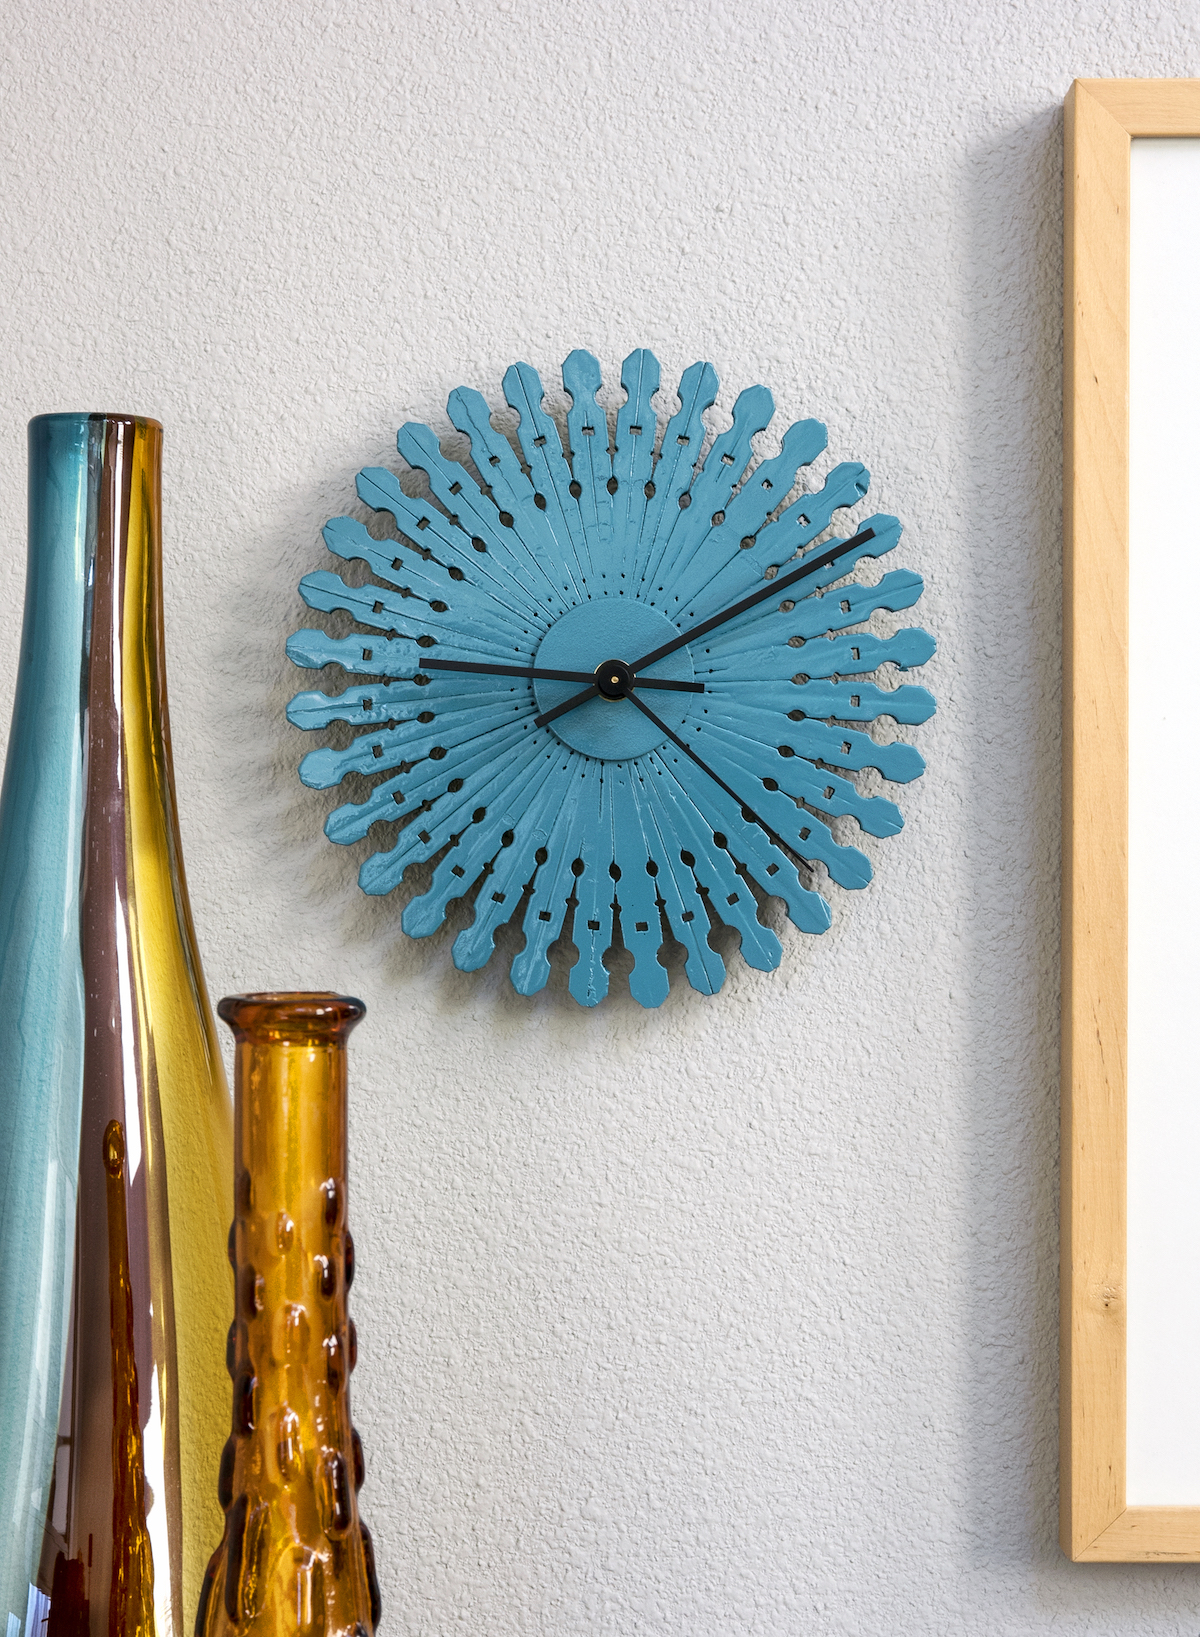 DIY clock made with clothespins